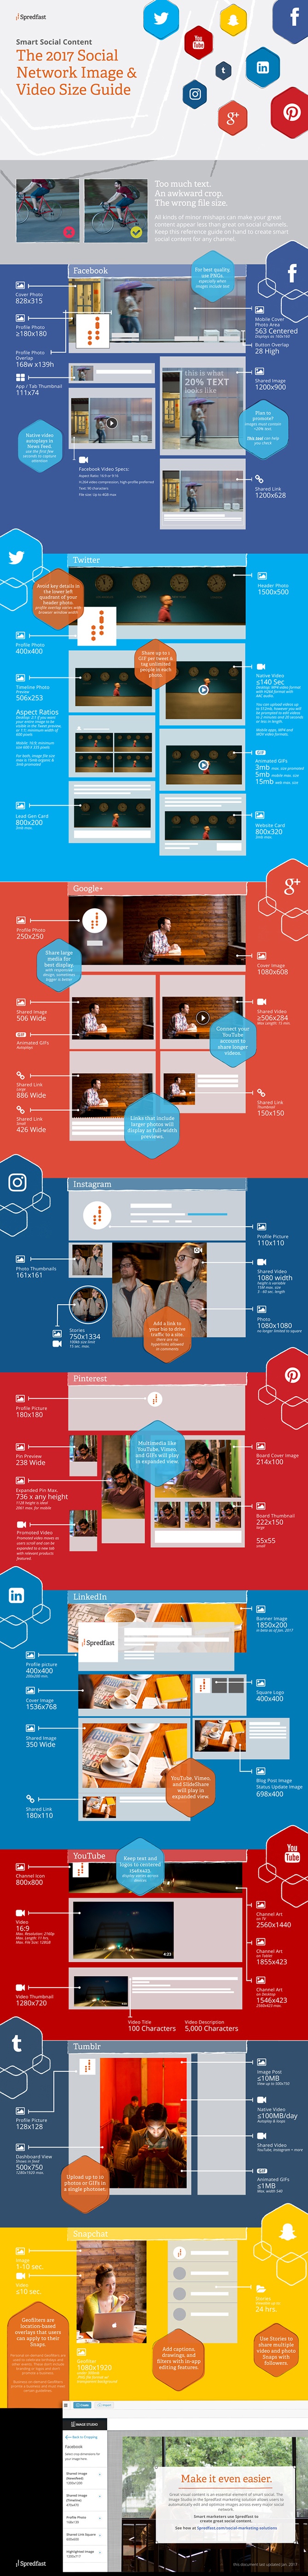 2017-sizing-for-social-media-infographic-tip-sheet-by-spredfast